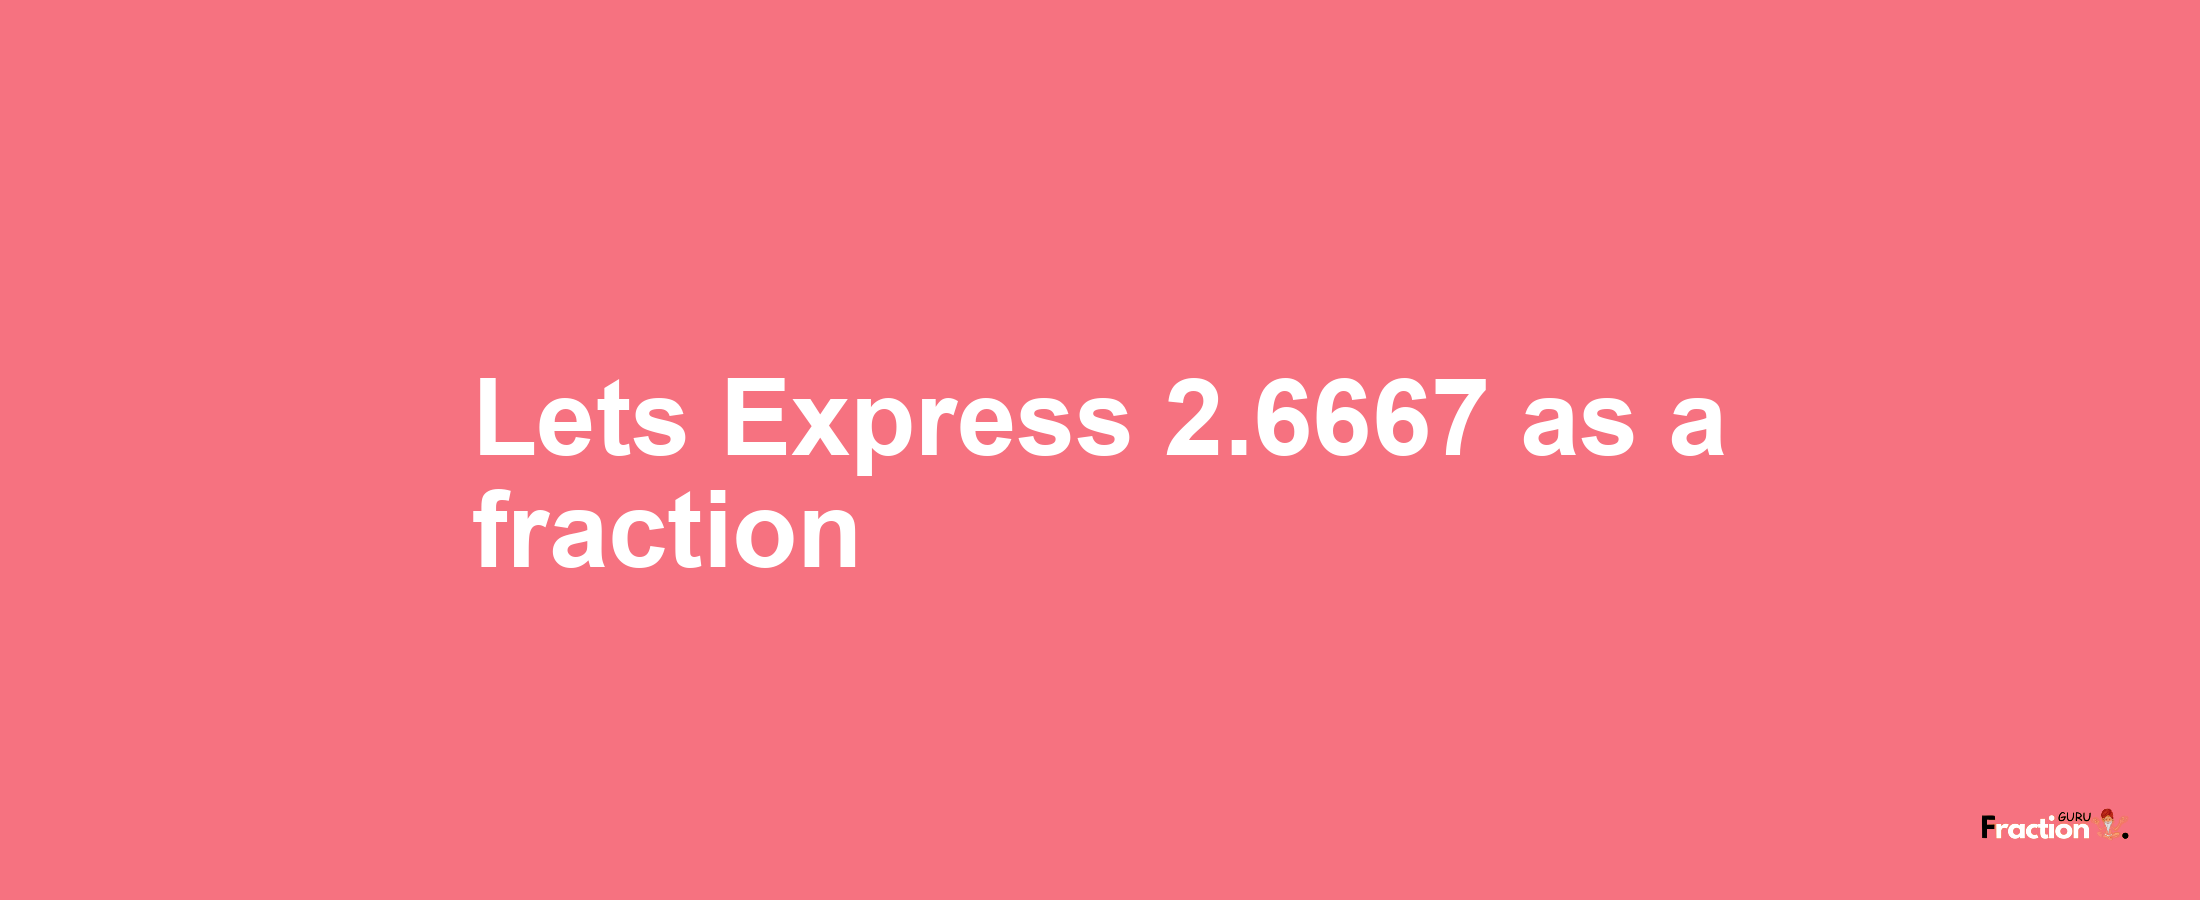 Lets Express 2.6667 as afraction